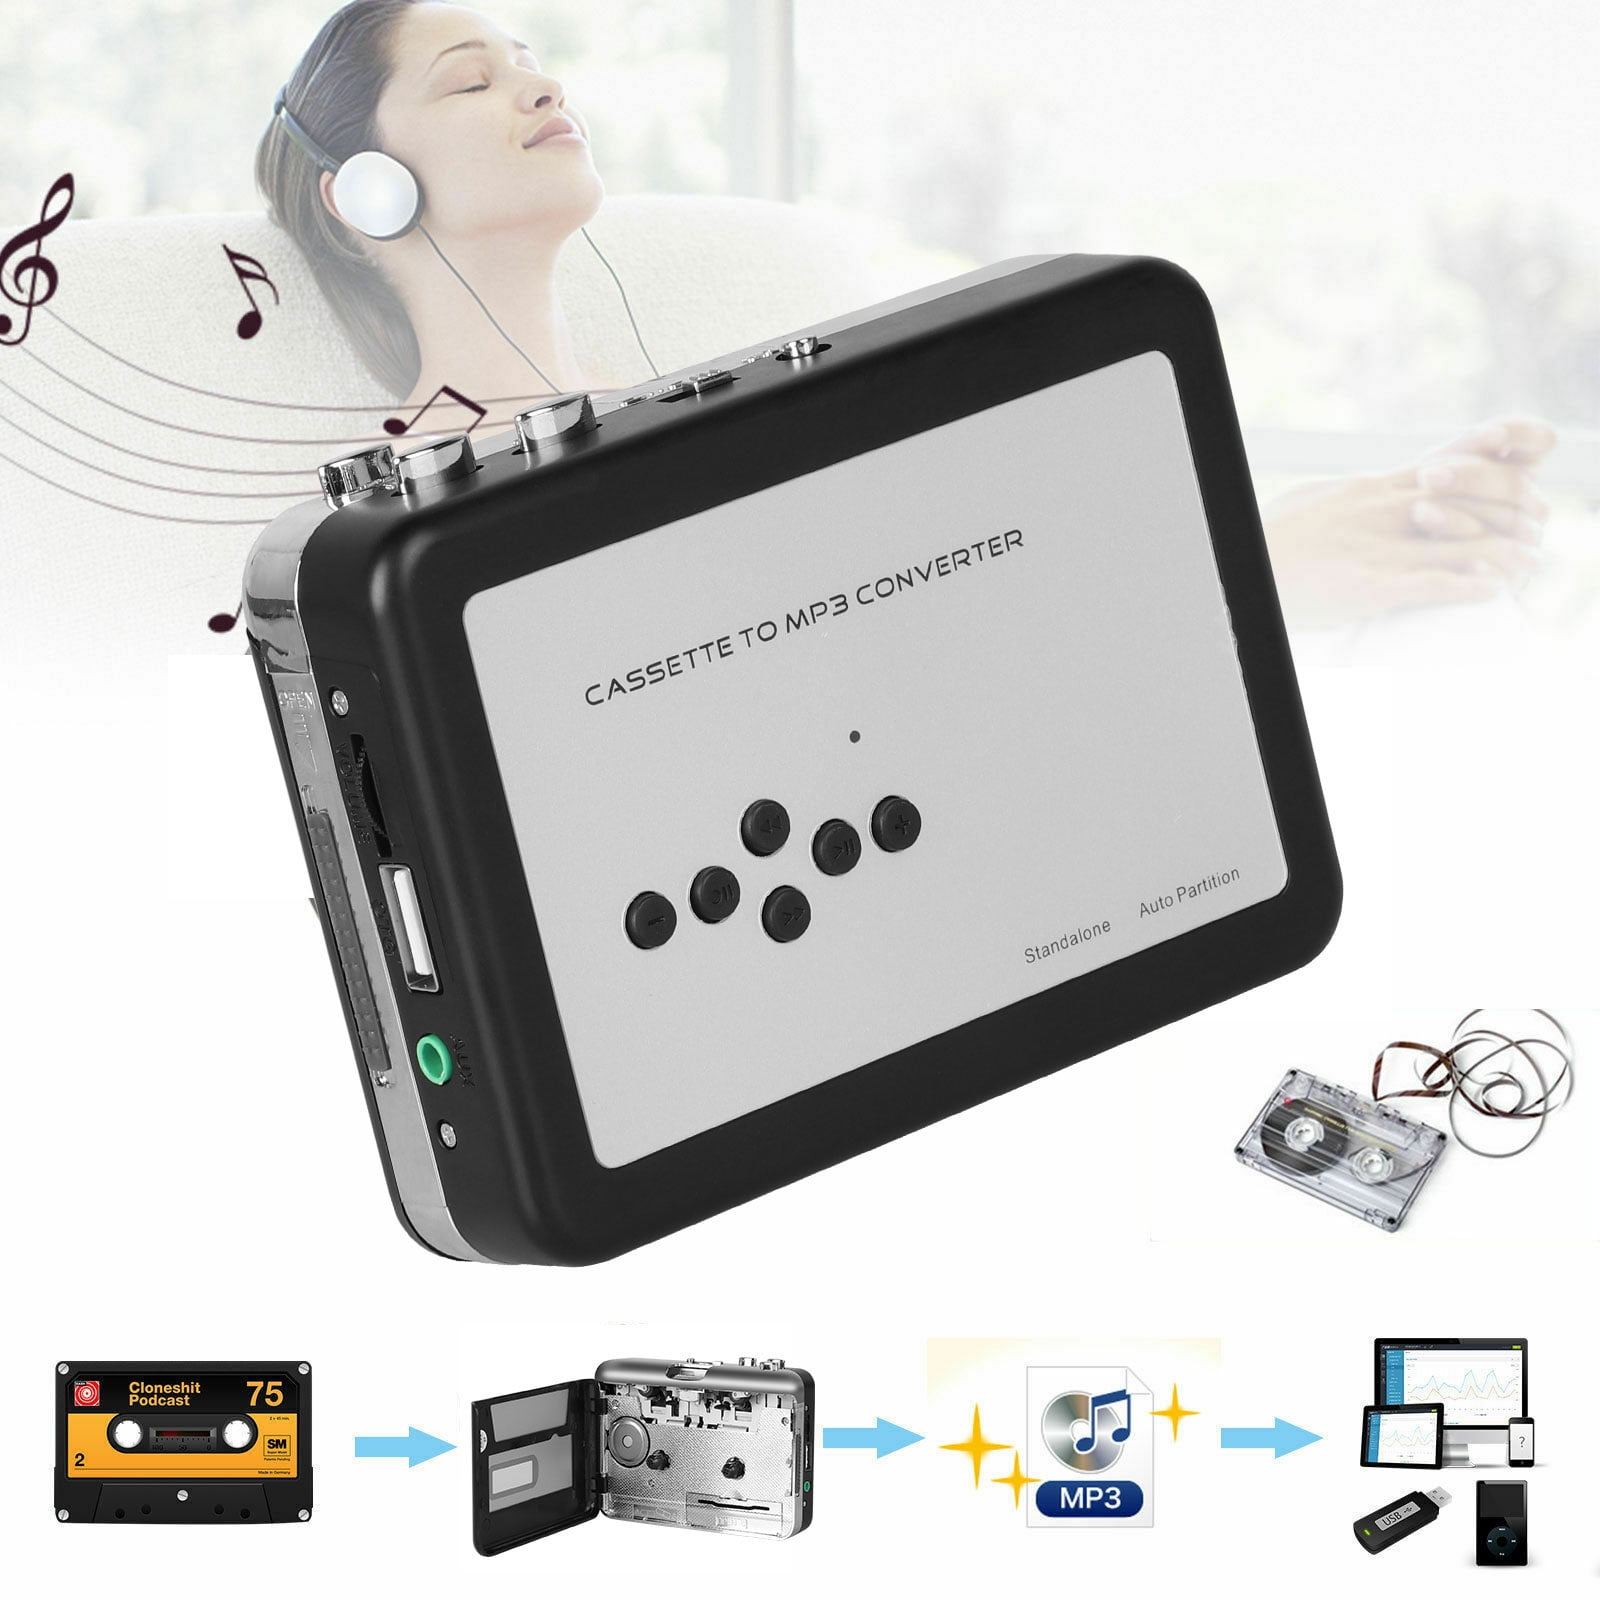 Cassette to MP3 Converter Digital Files for Laptop PC and Mac with Headphones from Tapes to Mp3 Tape Player Walkman USB Cassette Player from Tapes to MP3 